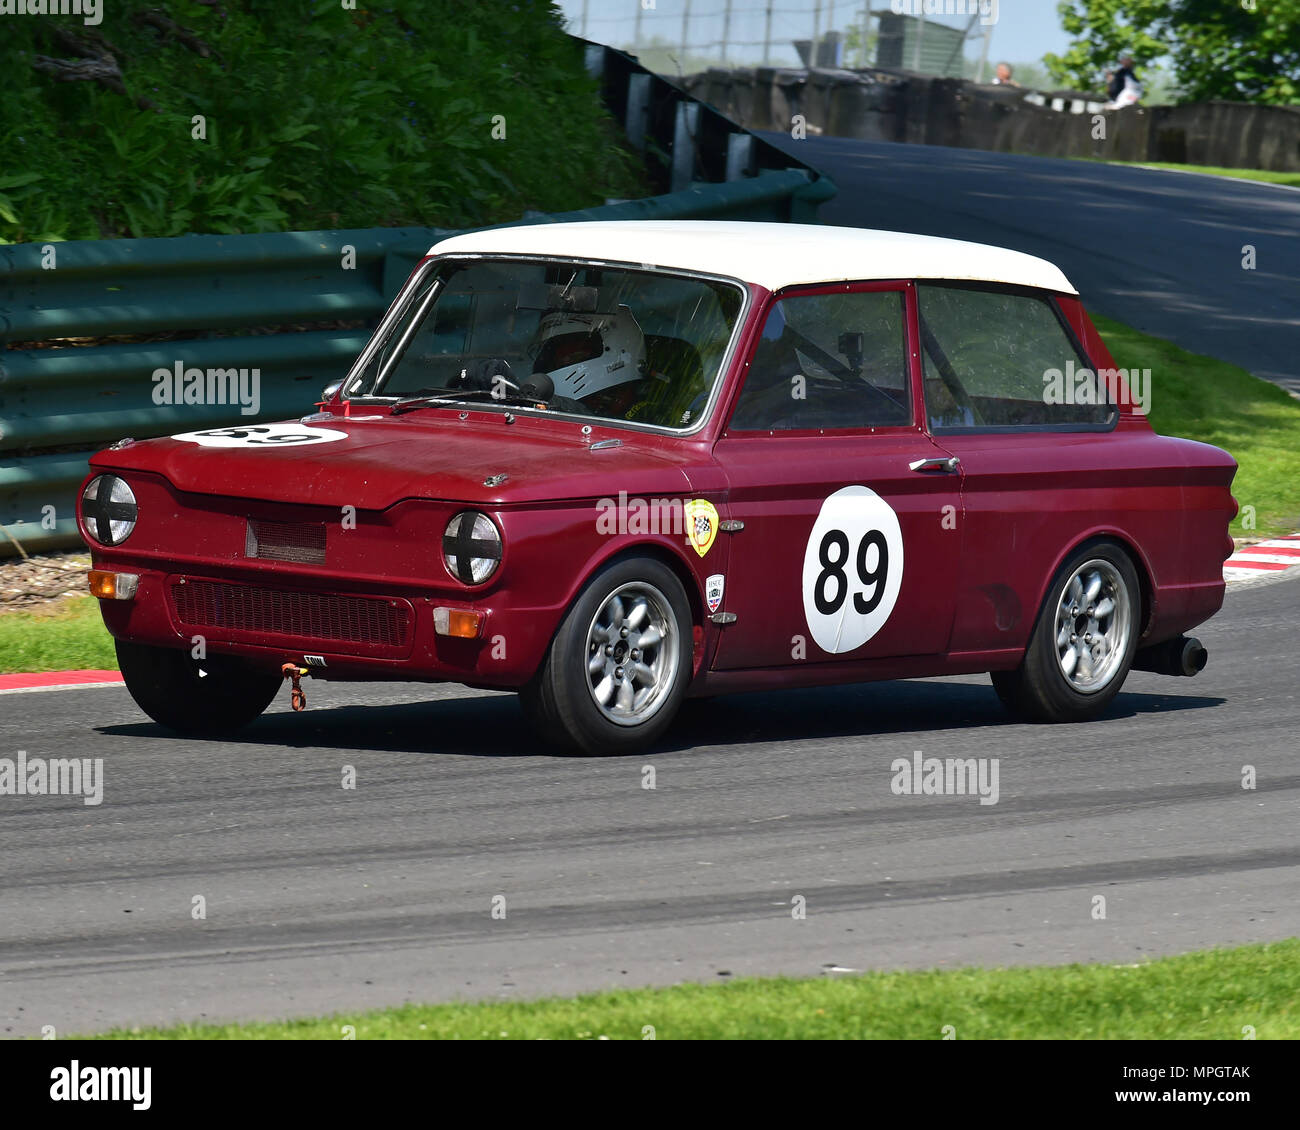 Adrian Oliver, Hillman Imp, HSCC, HRSR, Historic Touring Cars, HSCC Wolds Trophy May 20th, 2018, Cadwell Park, cars, Classic Racing Cars, Historic Rac Stock Photo